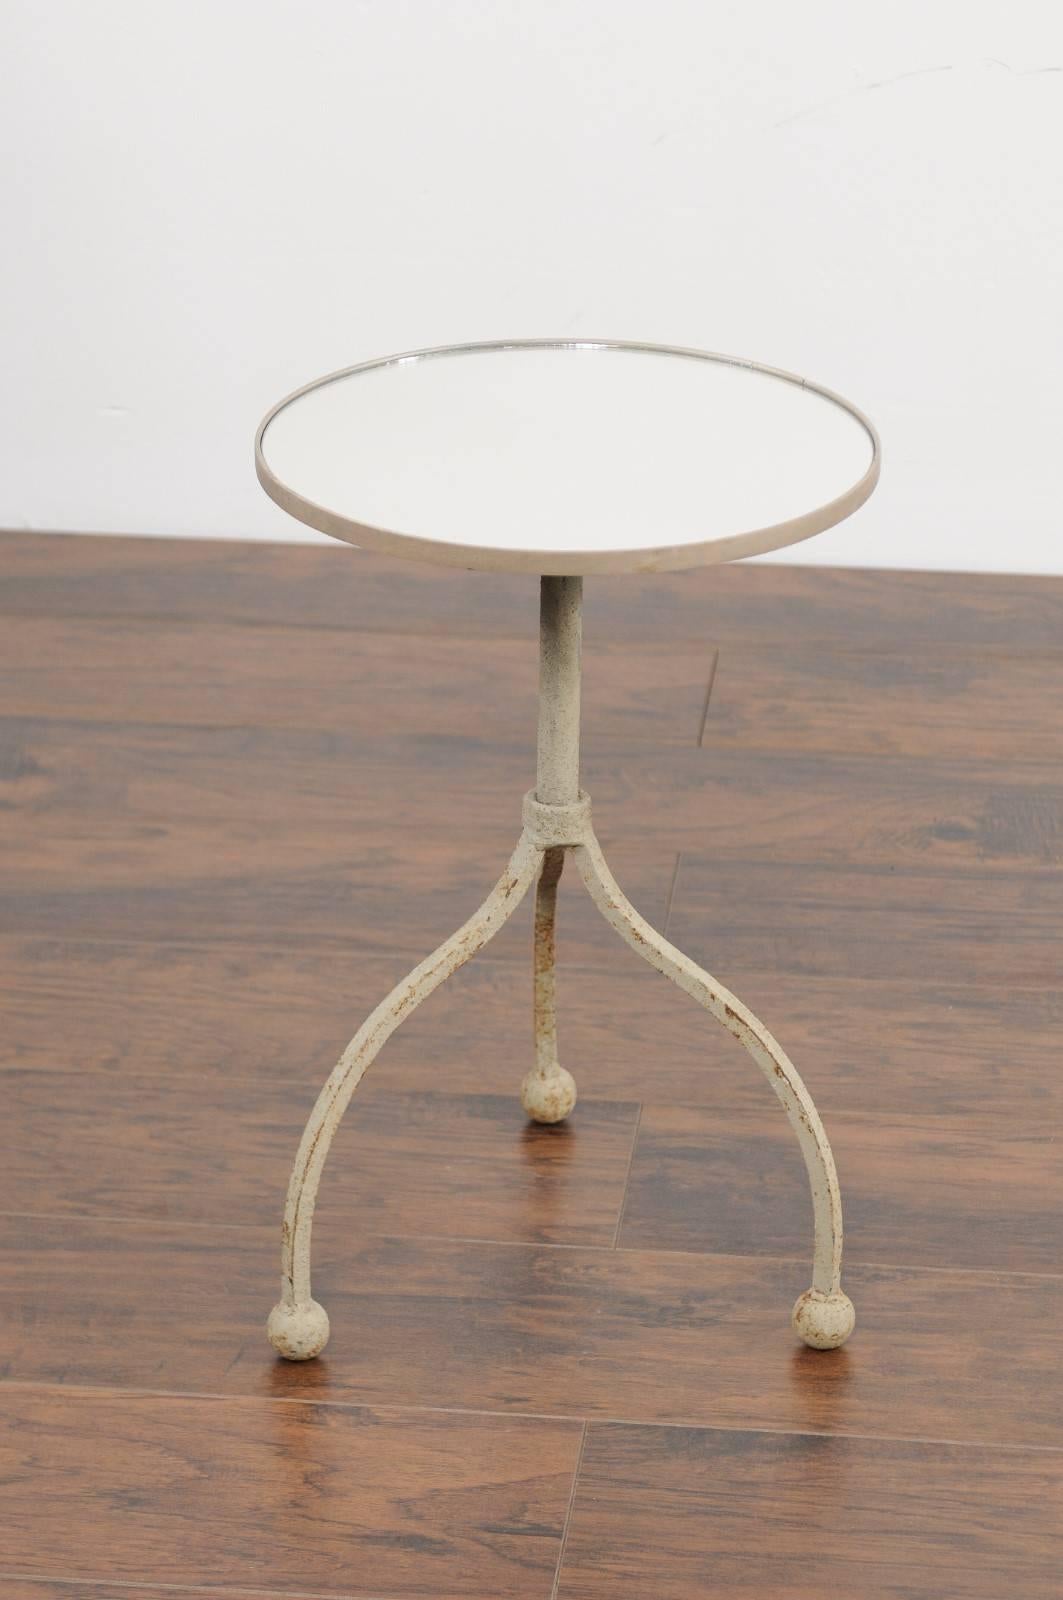 Mirror Vintage French Painted Iron Circular Side Table with Tripod Base, circa 1940